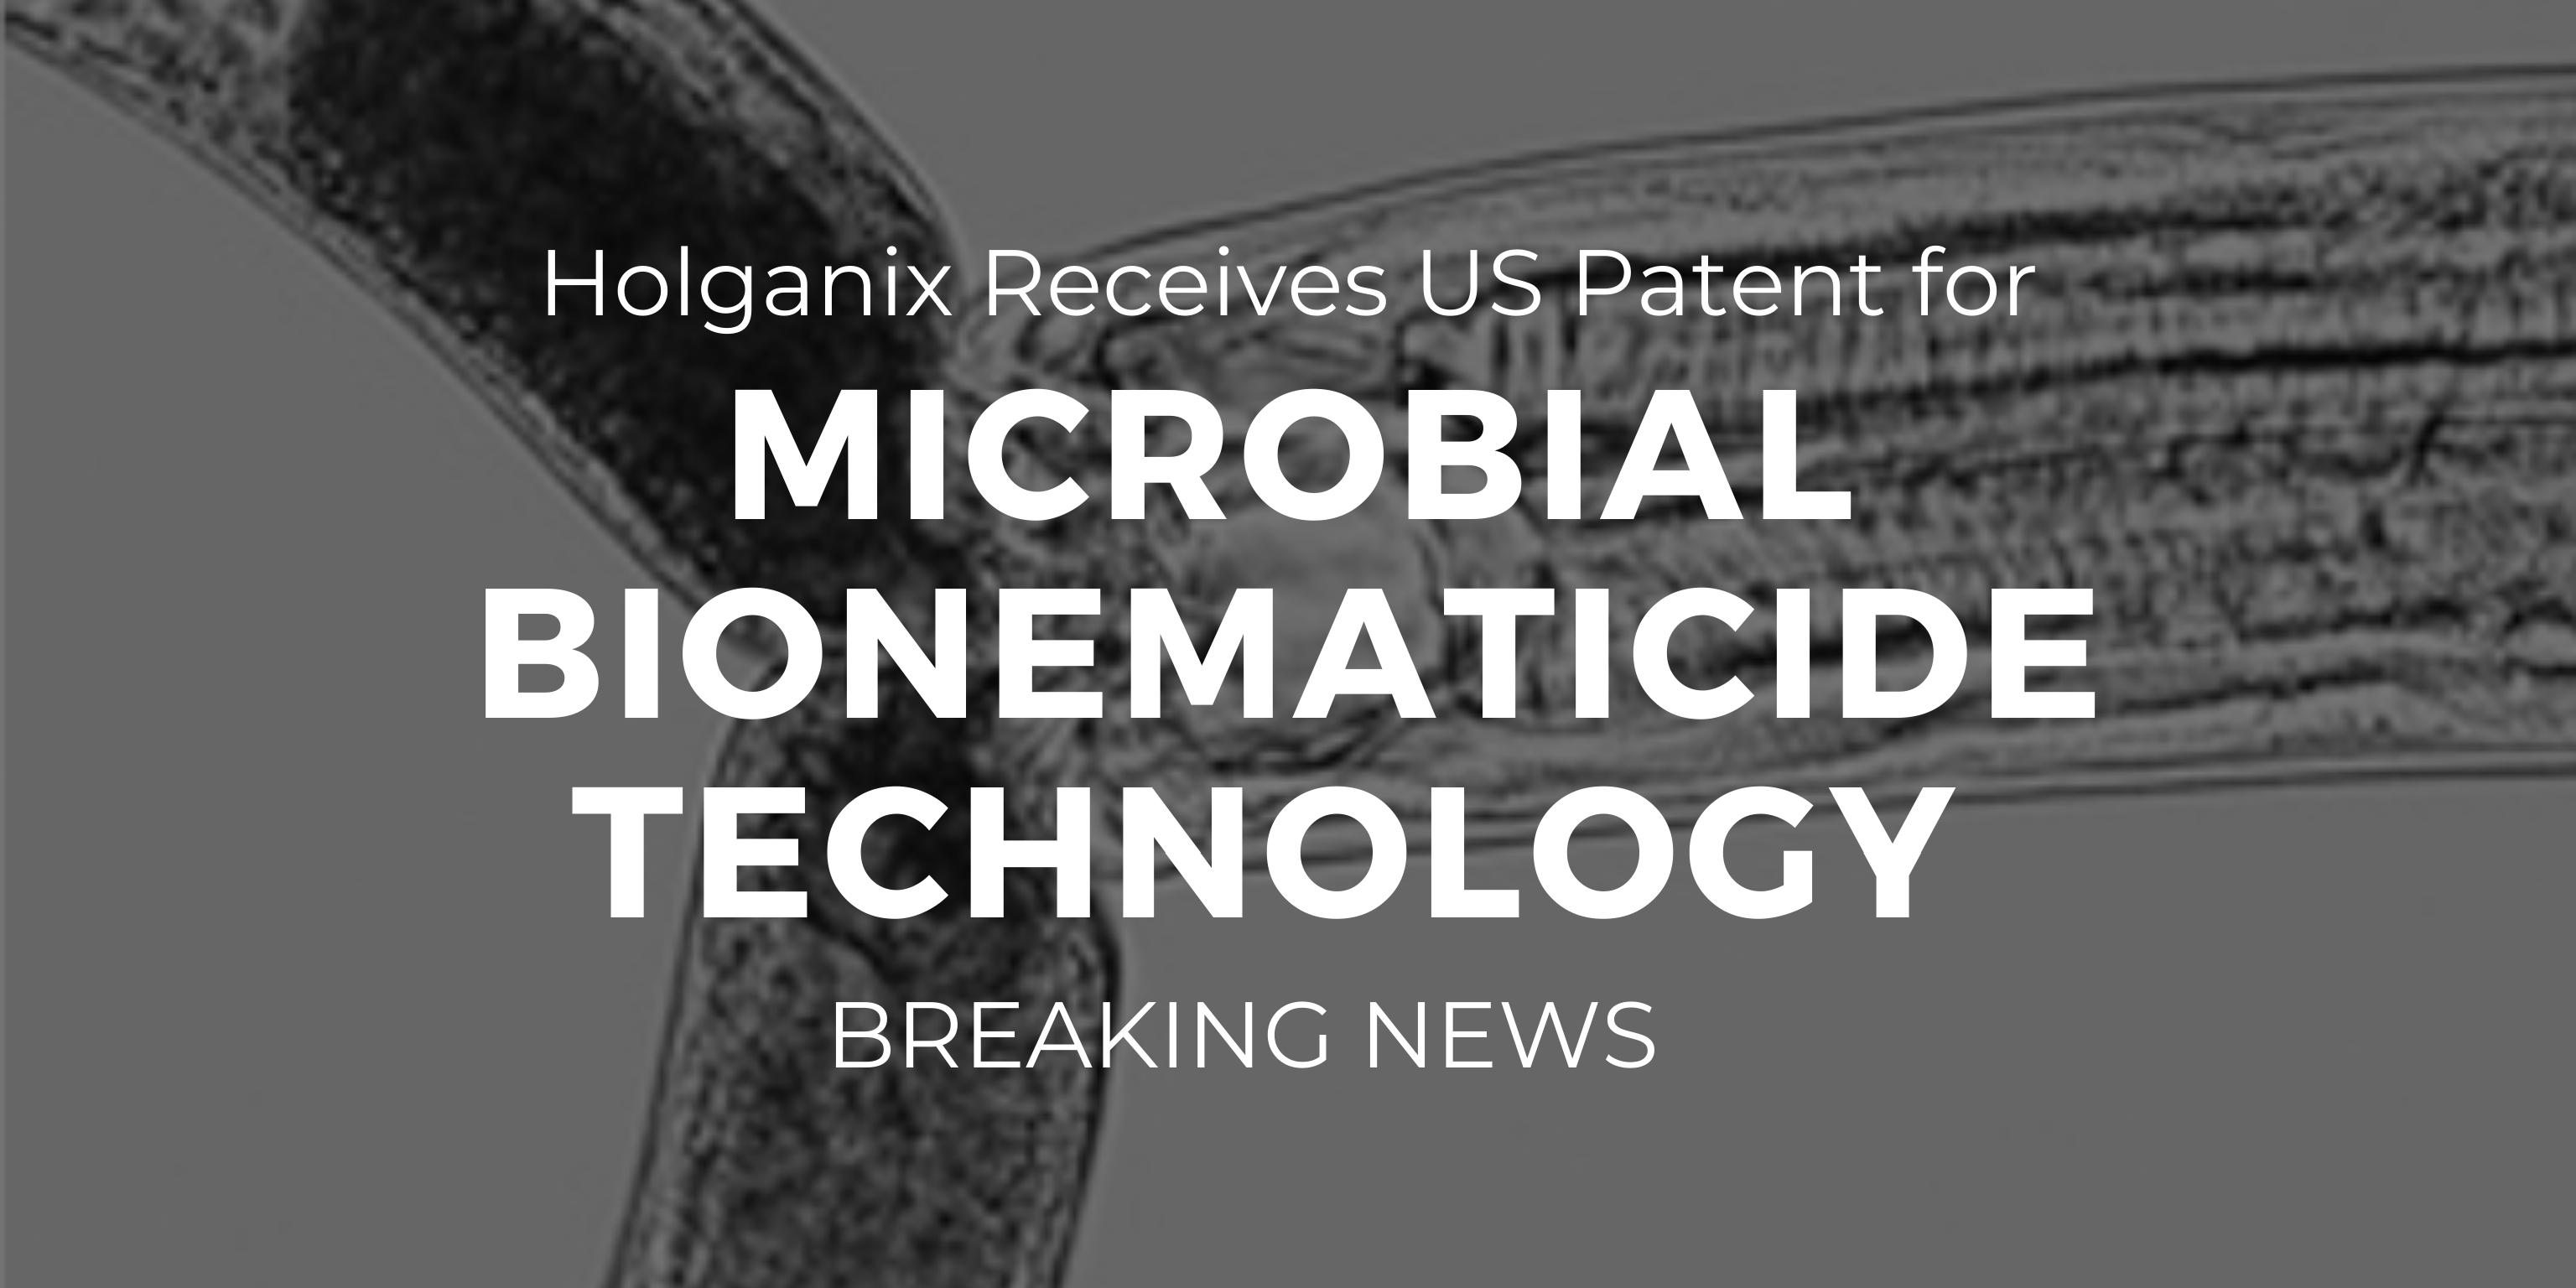 Holganix Receives U.S. Patent for Microbial Bionematicide Technology